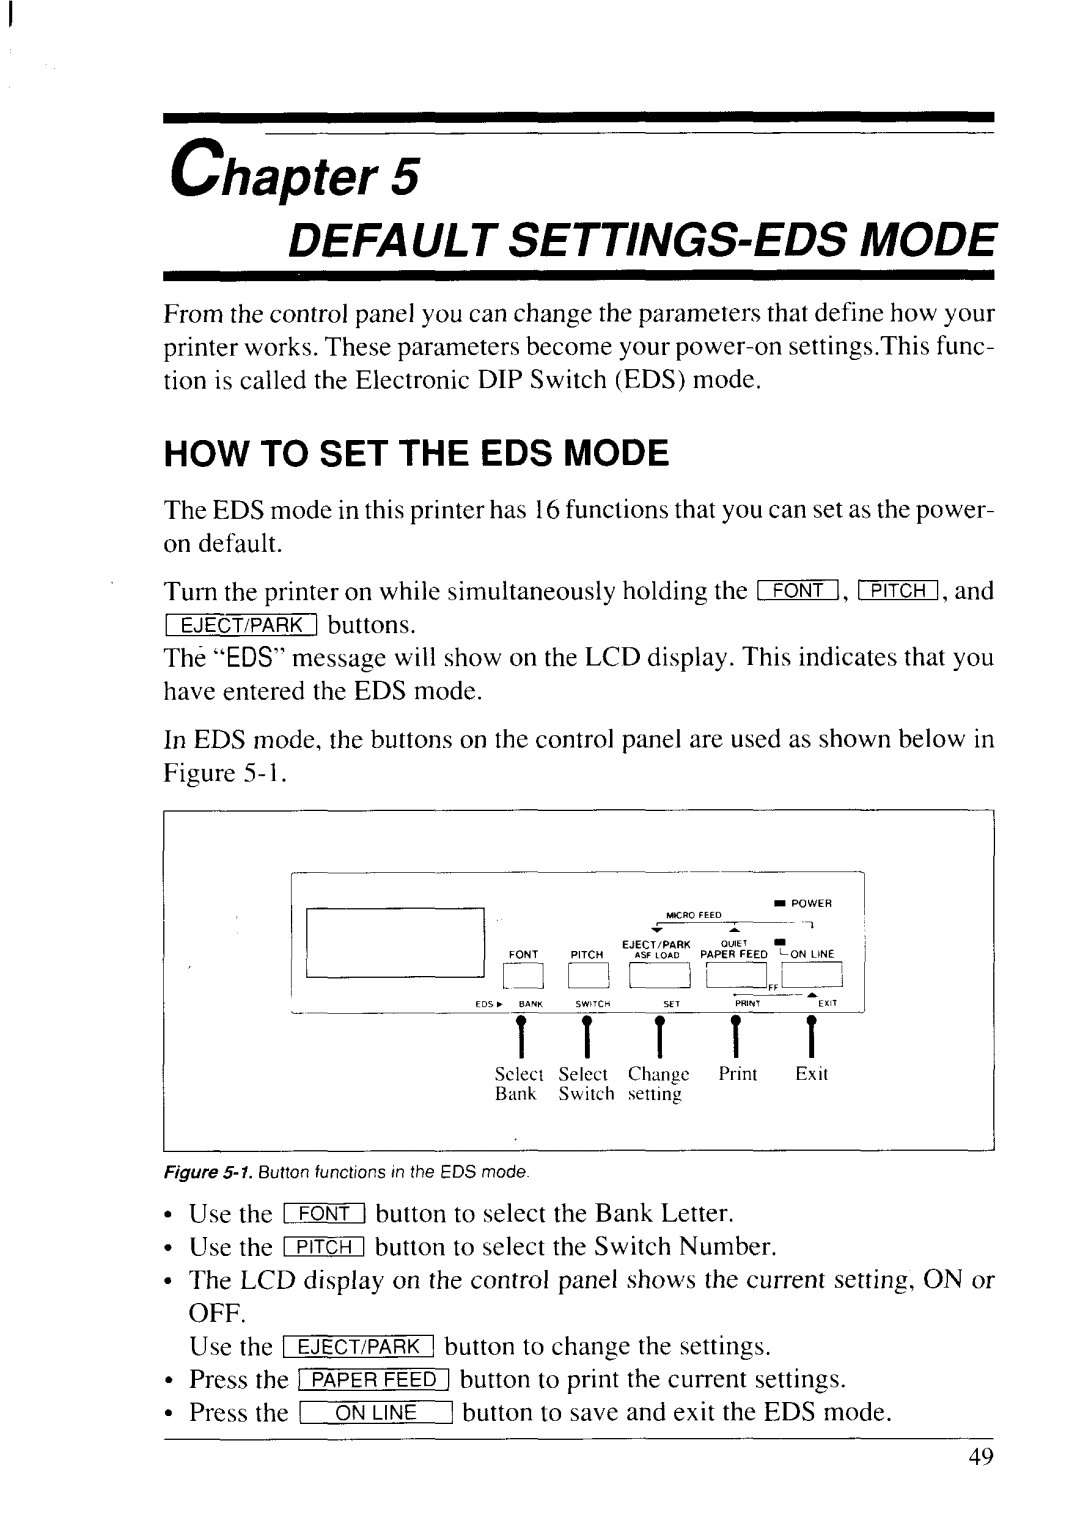 Star Micronics NX-2430 manual chapter, Default Settings=Eds Mode, How To Set The Eds Mode 